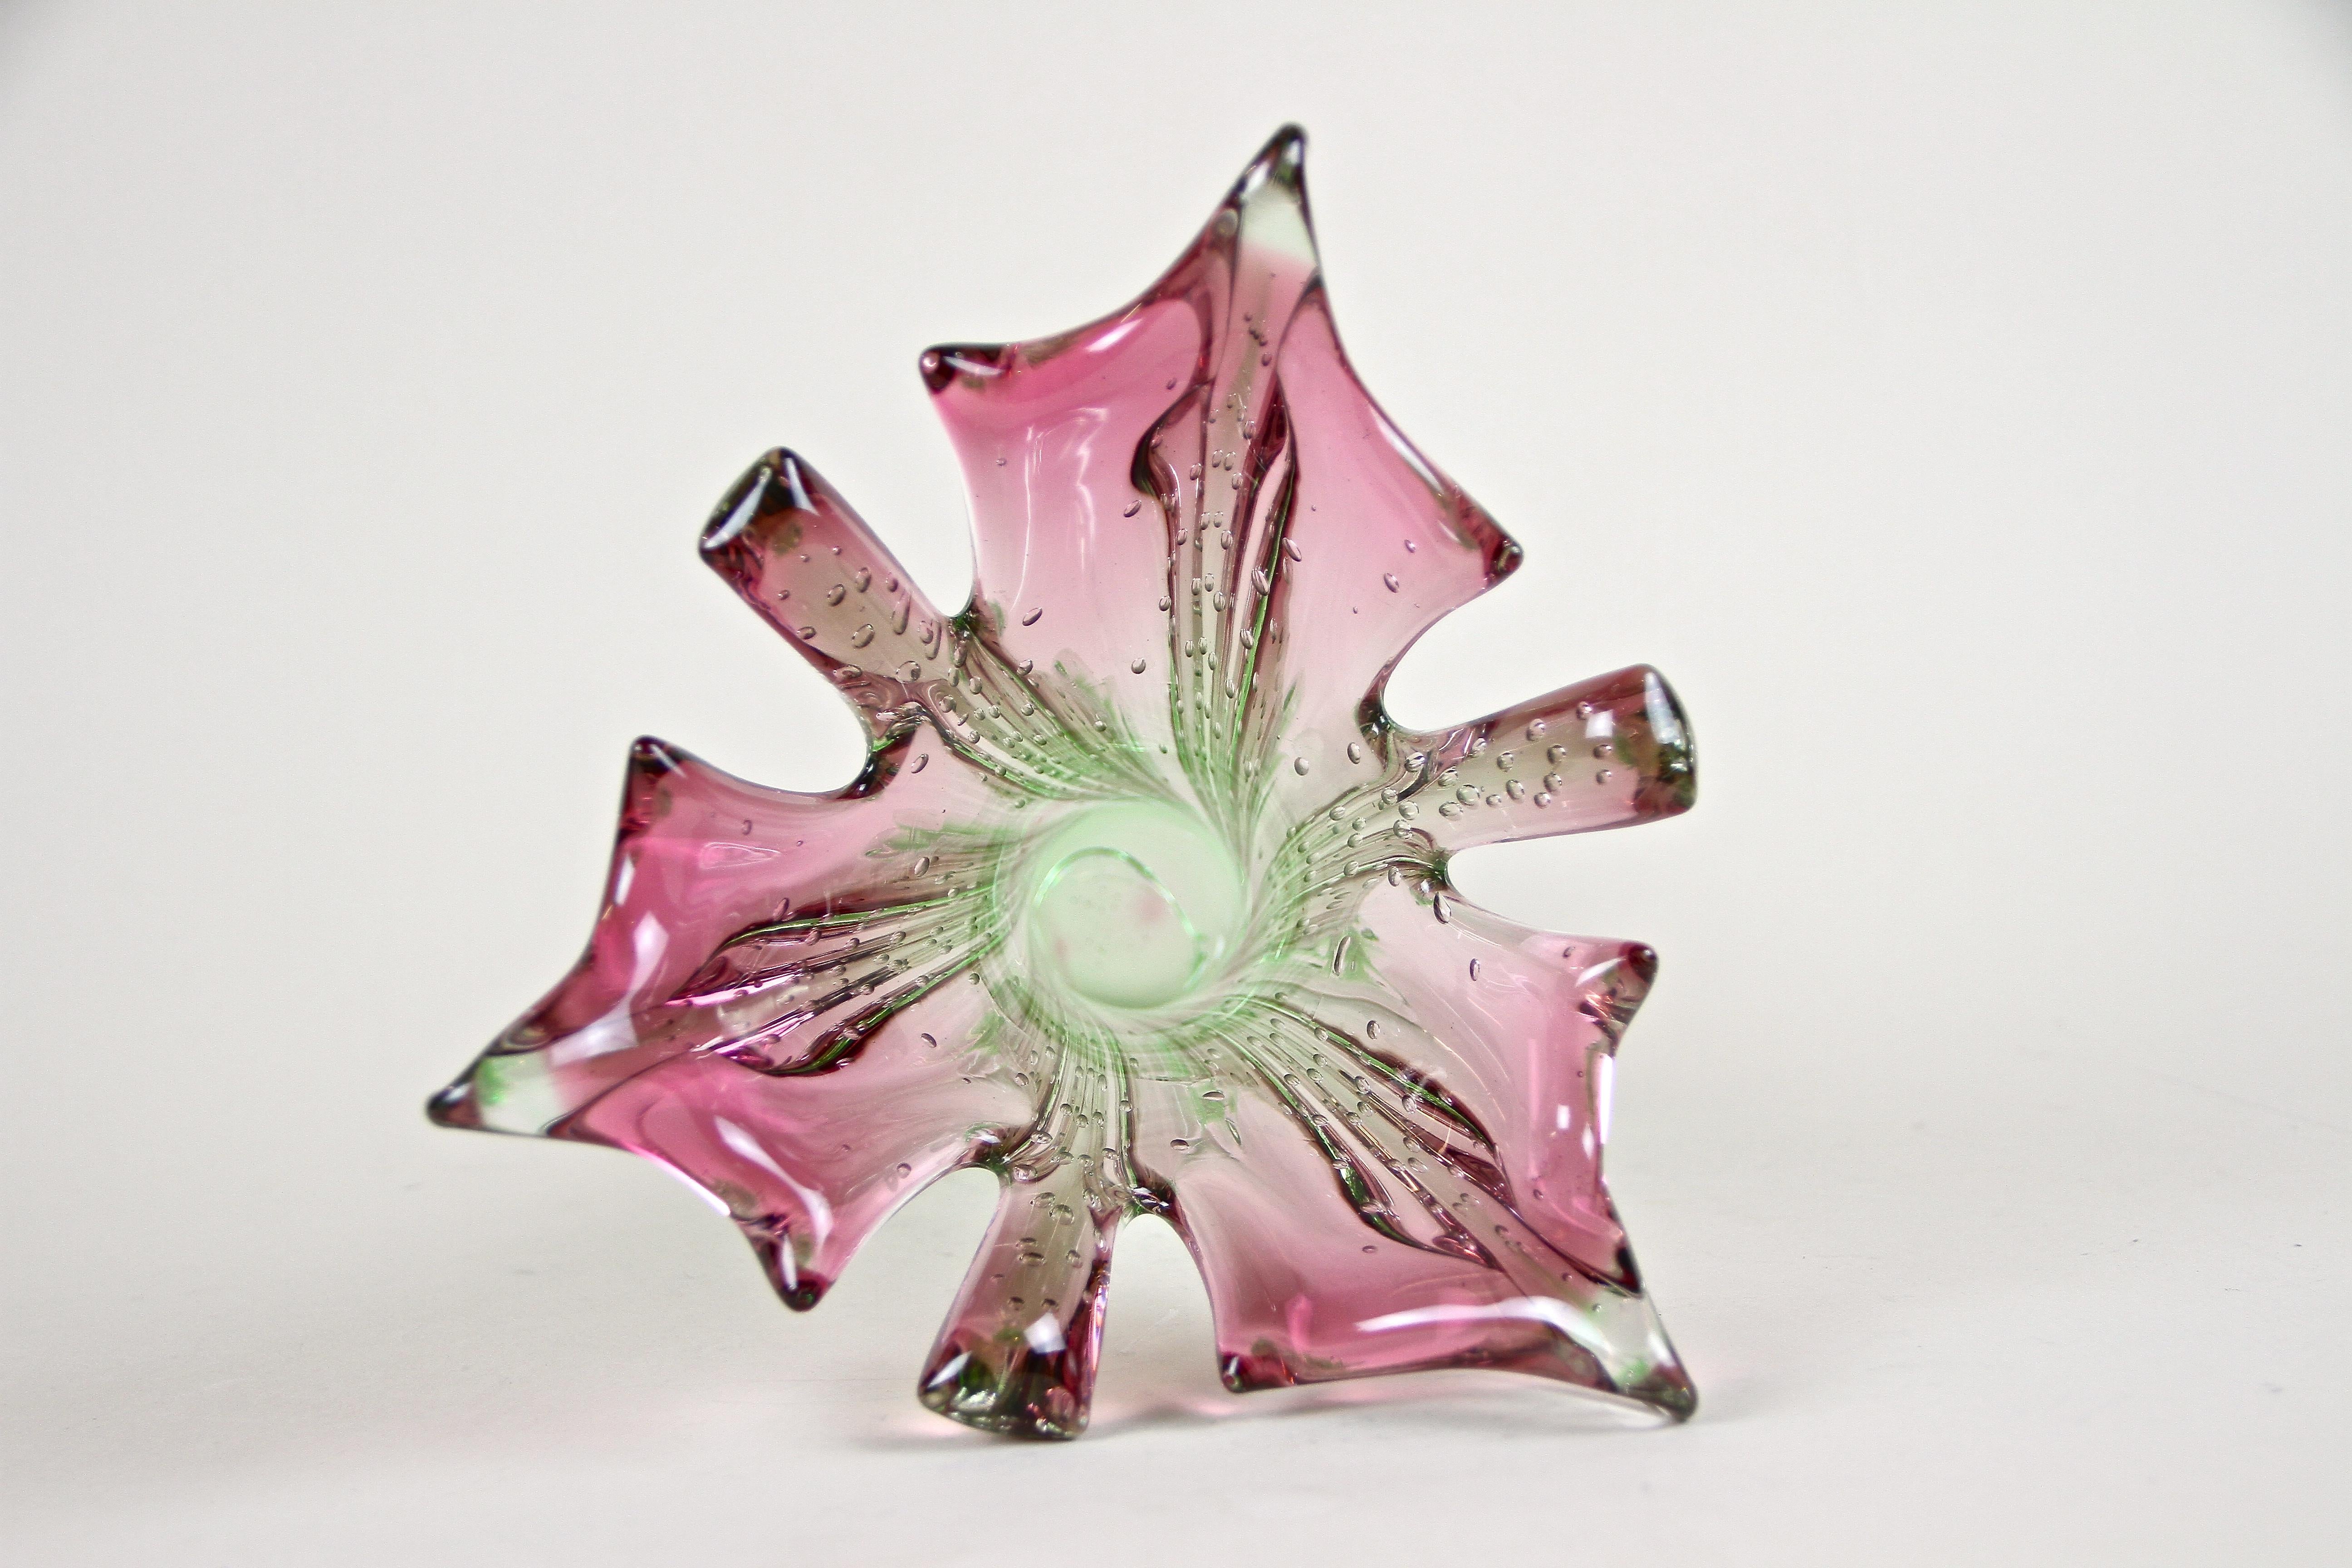 Mid Century Sommerso Murano Glass Vase Pink/ Green, Italy, circa 1960/70 For Sale 3